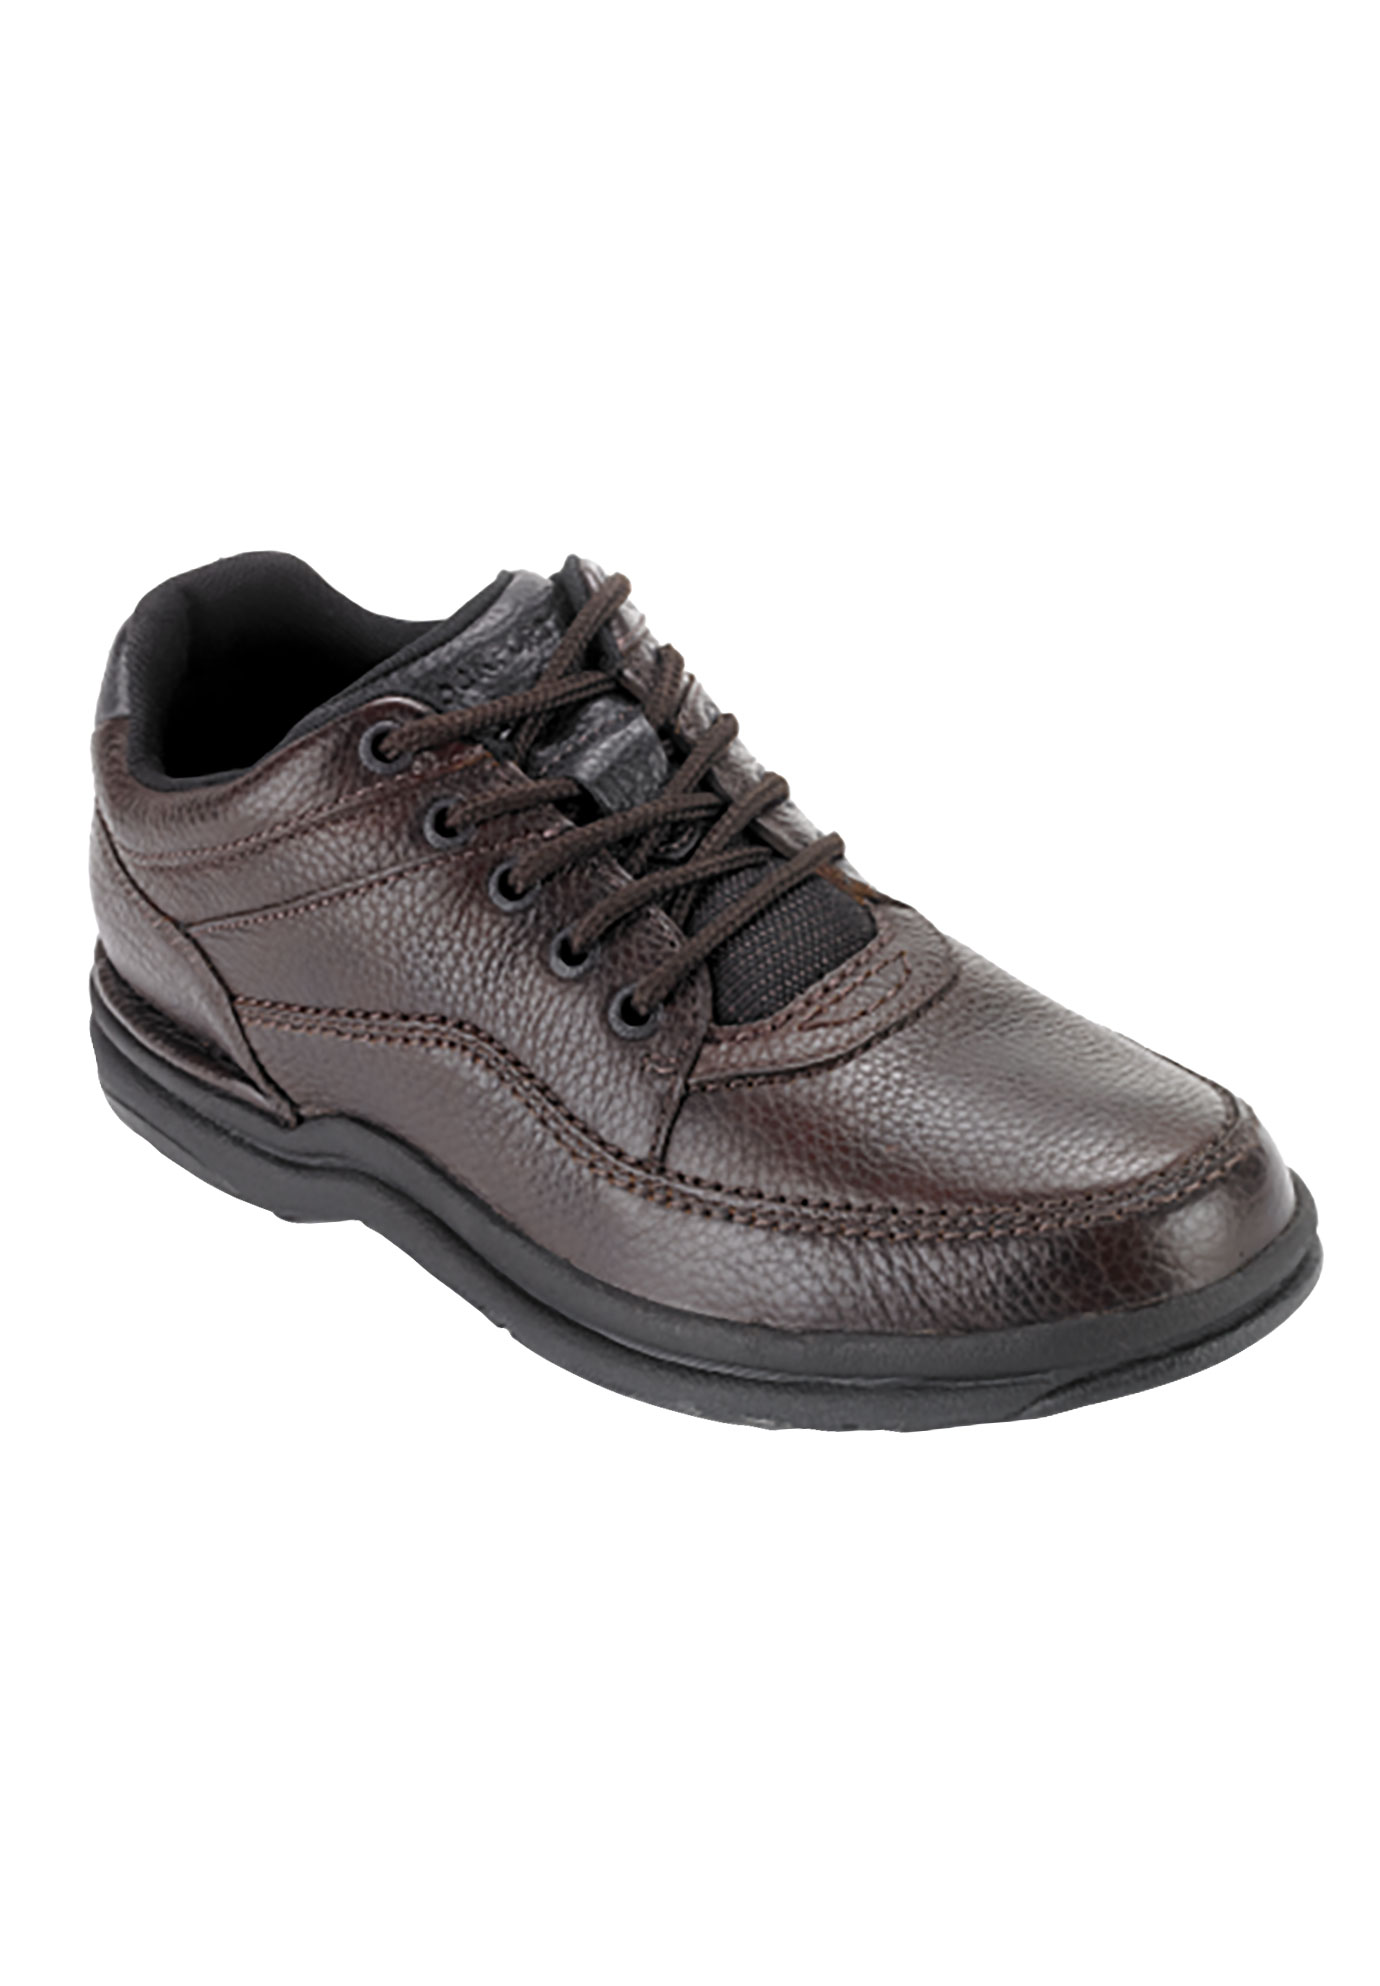 rockport classic world tour walking shoes